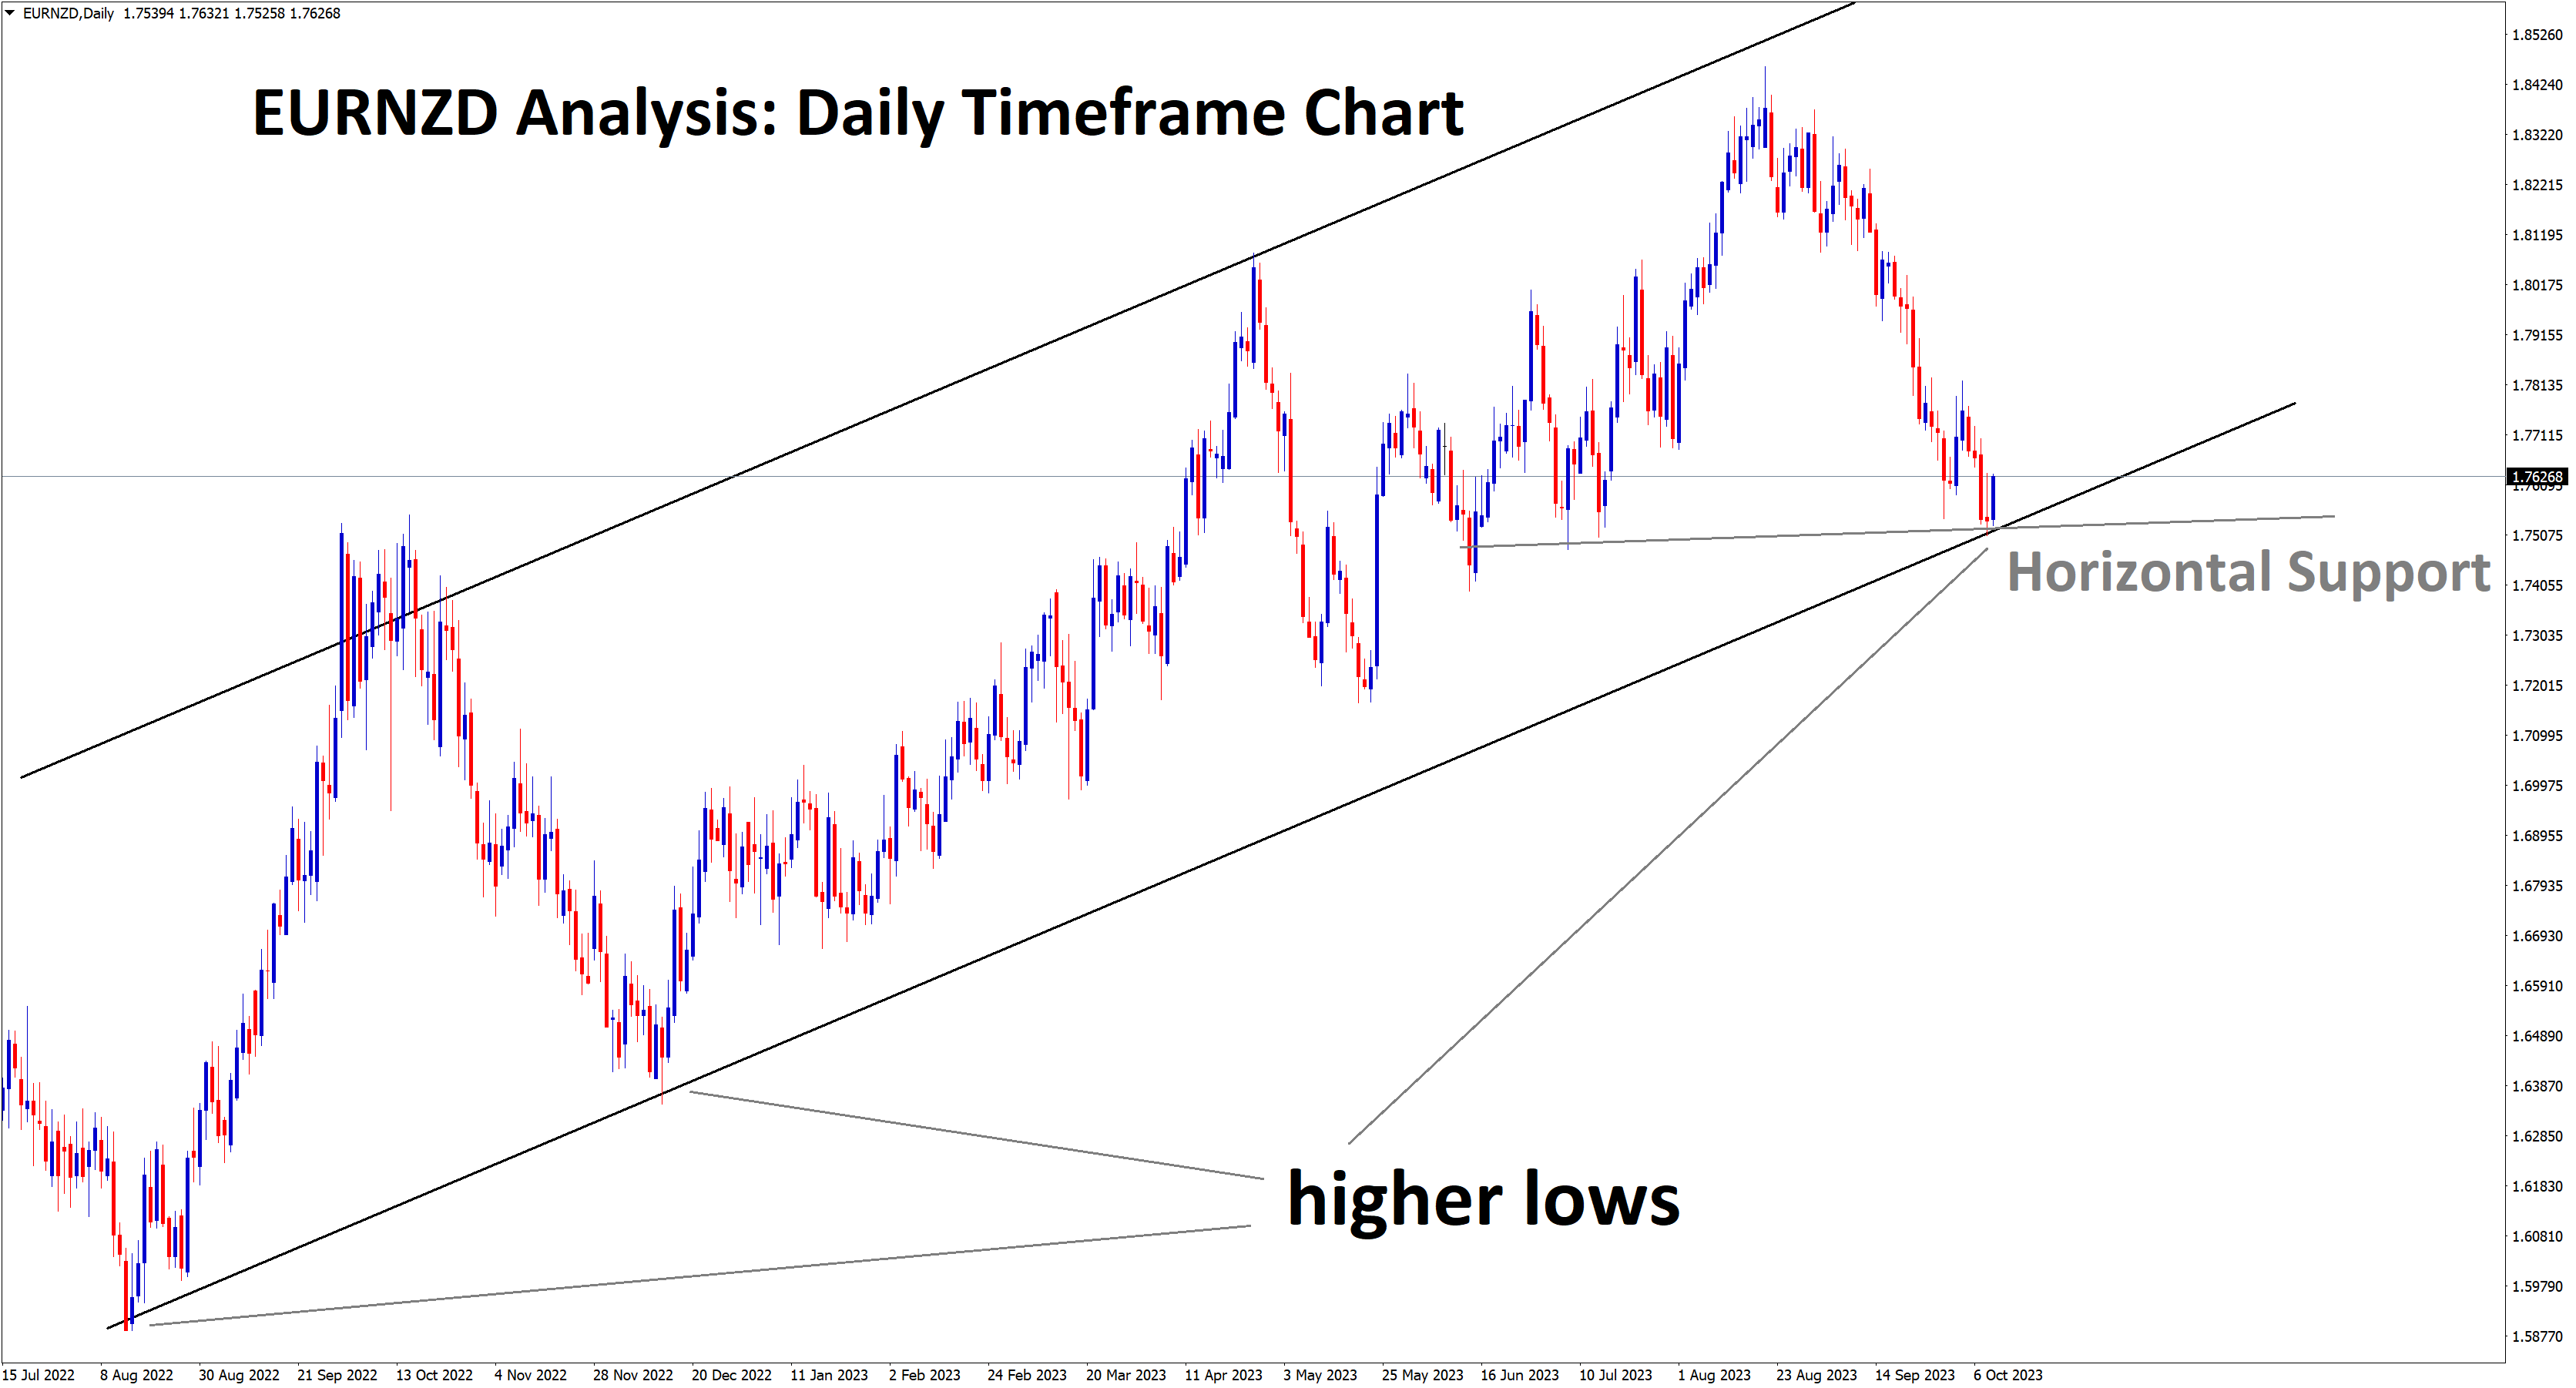 eurnzd at higher low